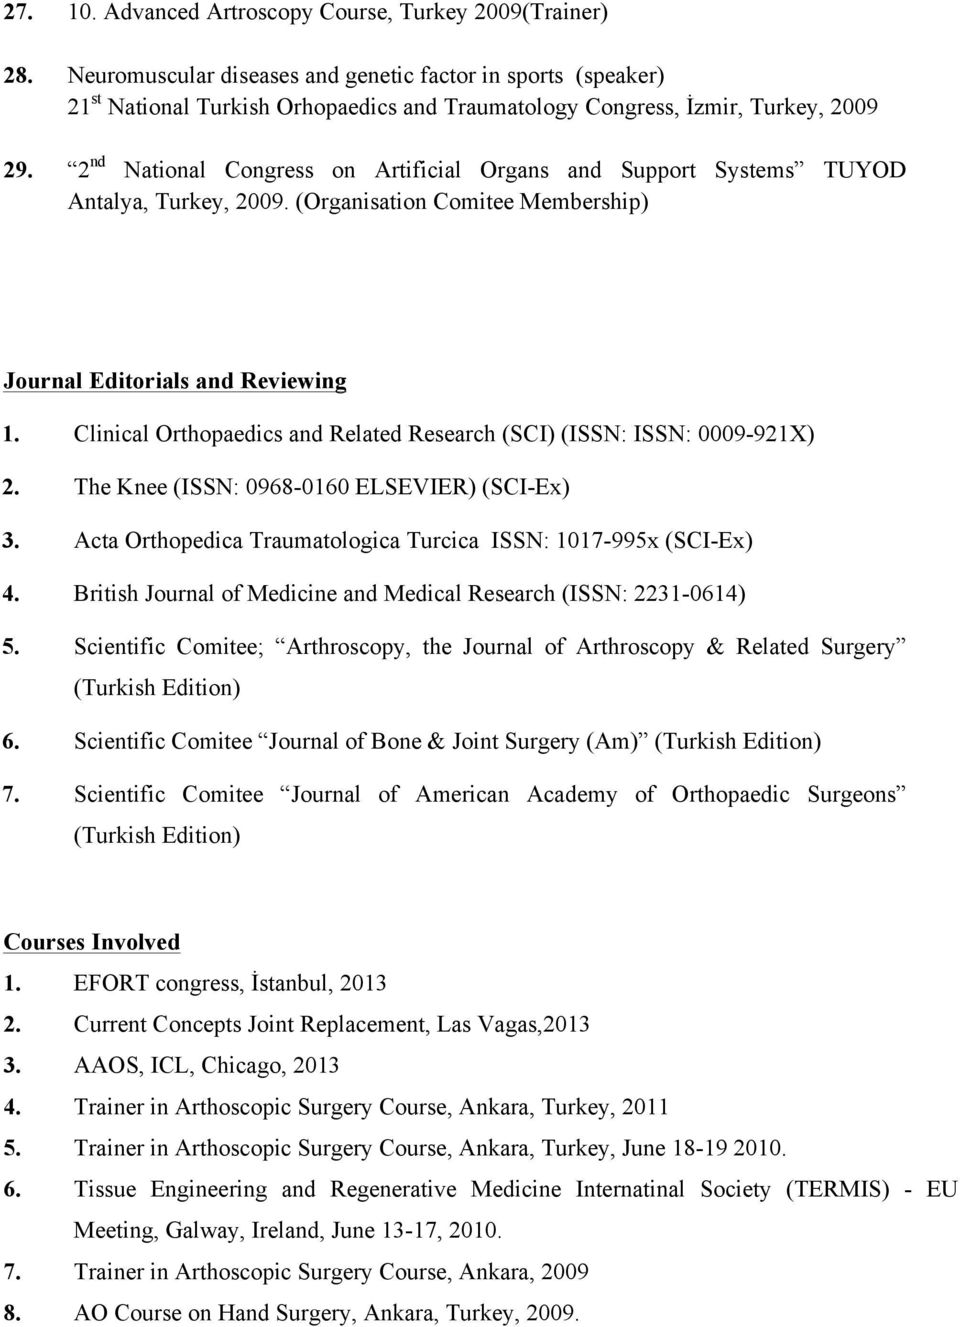 2 nd National Congress on Artificial Organs and Support Systems TUYOD Antalya, Turkey, 2009. (Organisation Comitee Membership) Journal Editorials and Reviewing 1.